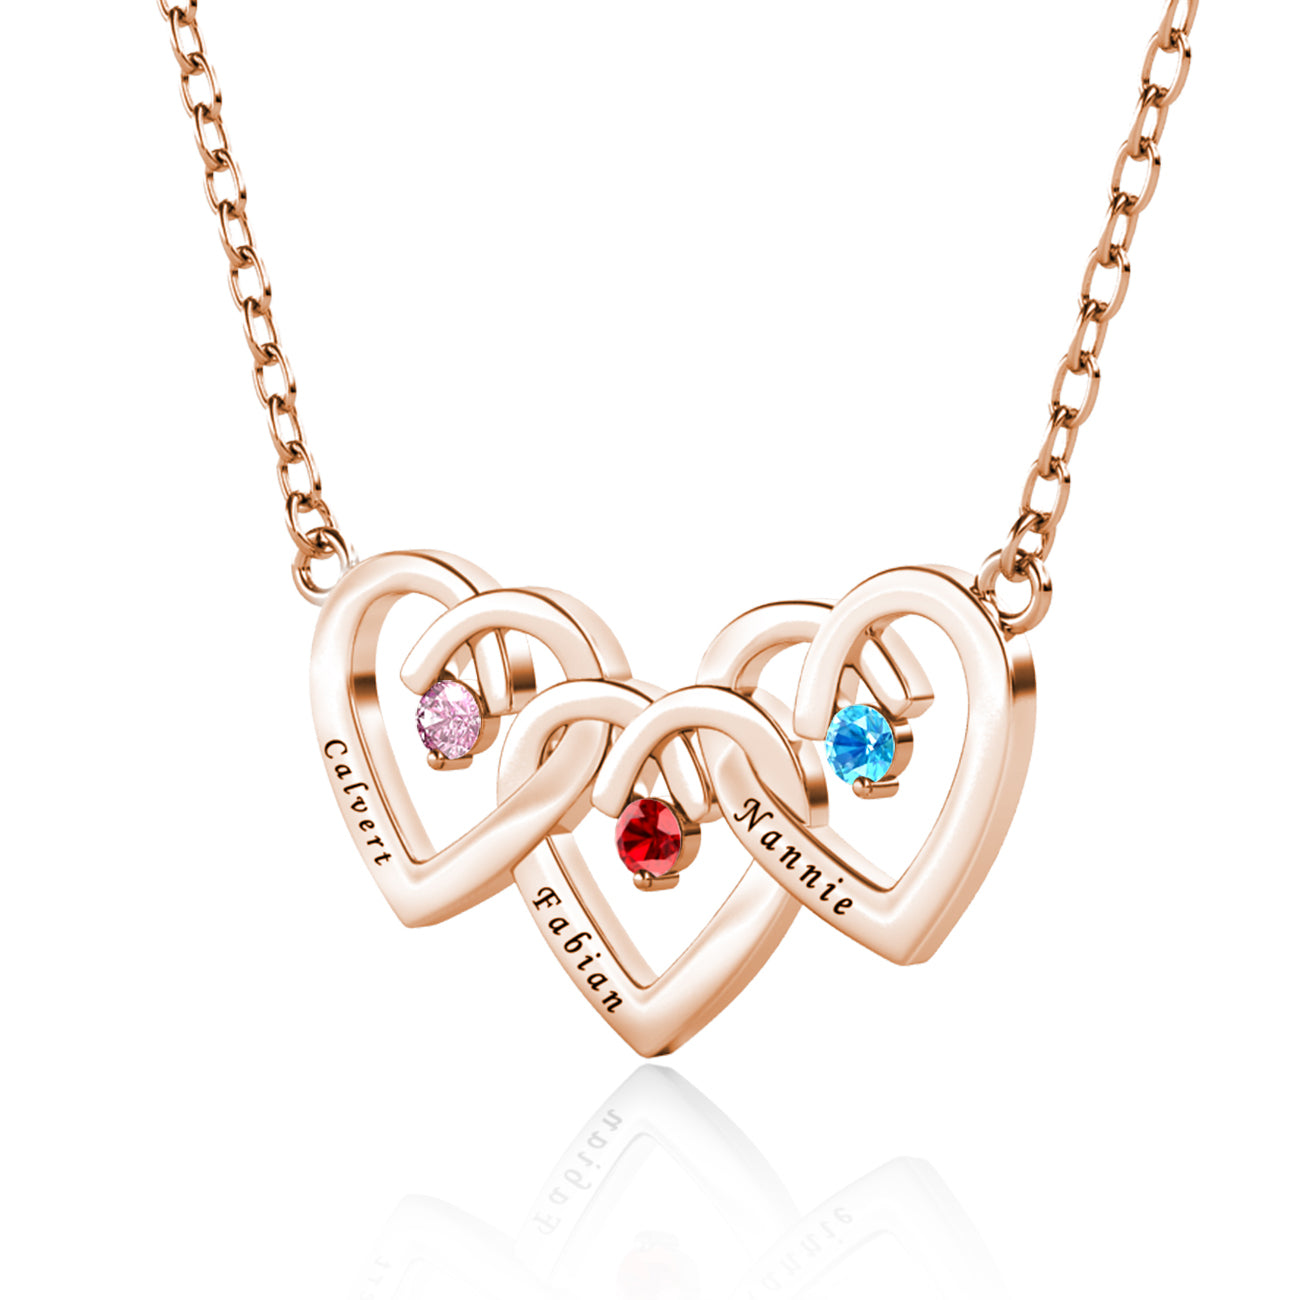 Personalised Engraved 3 Heart Pendant Necklace with 3 Birthstones